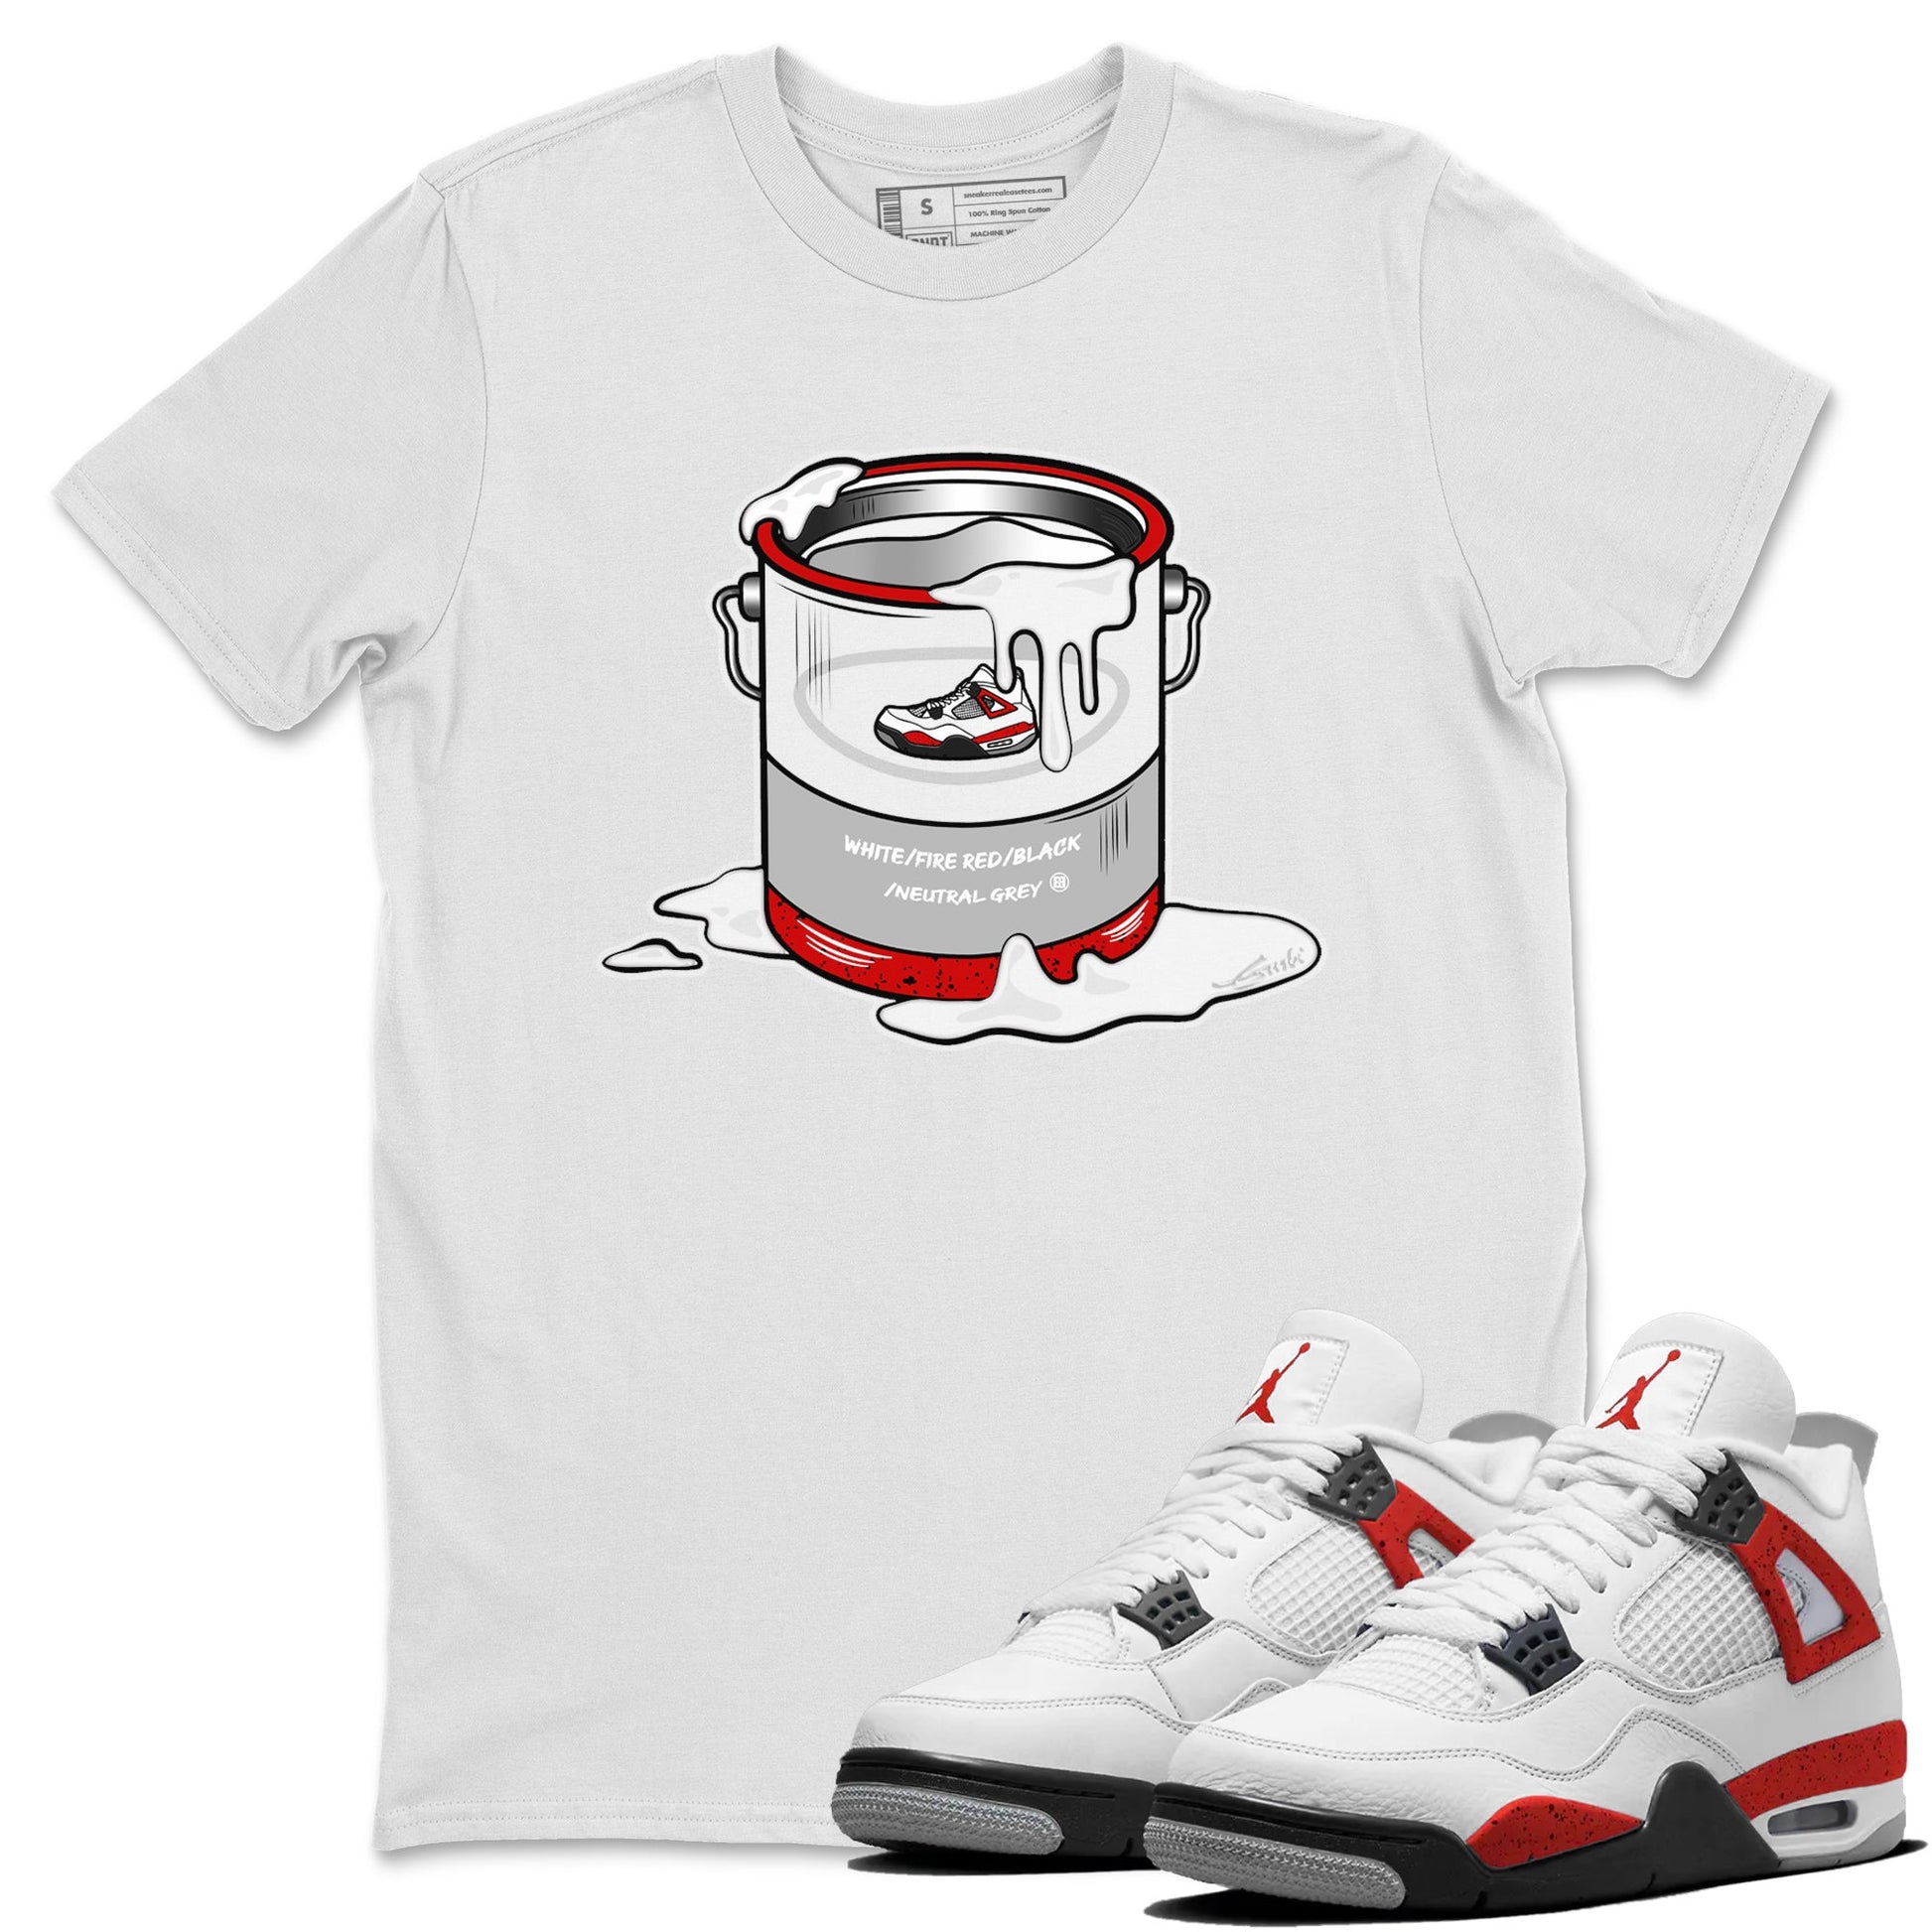 Air Jordan 4 Red Cement Sneaker Match Tees Bucket Sneaker Tees Air Jordan 4 Retro Red Cement SNRT Sneaker Release Tees Unisex Shirts White 1